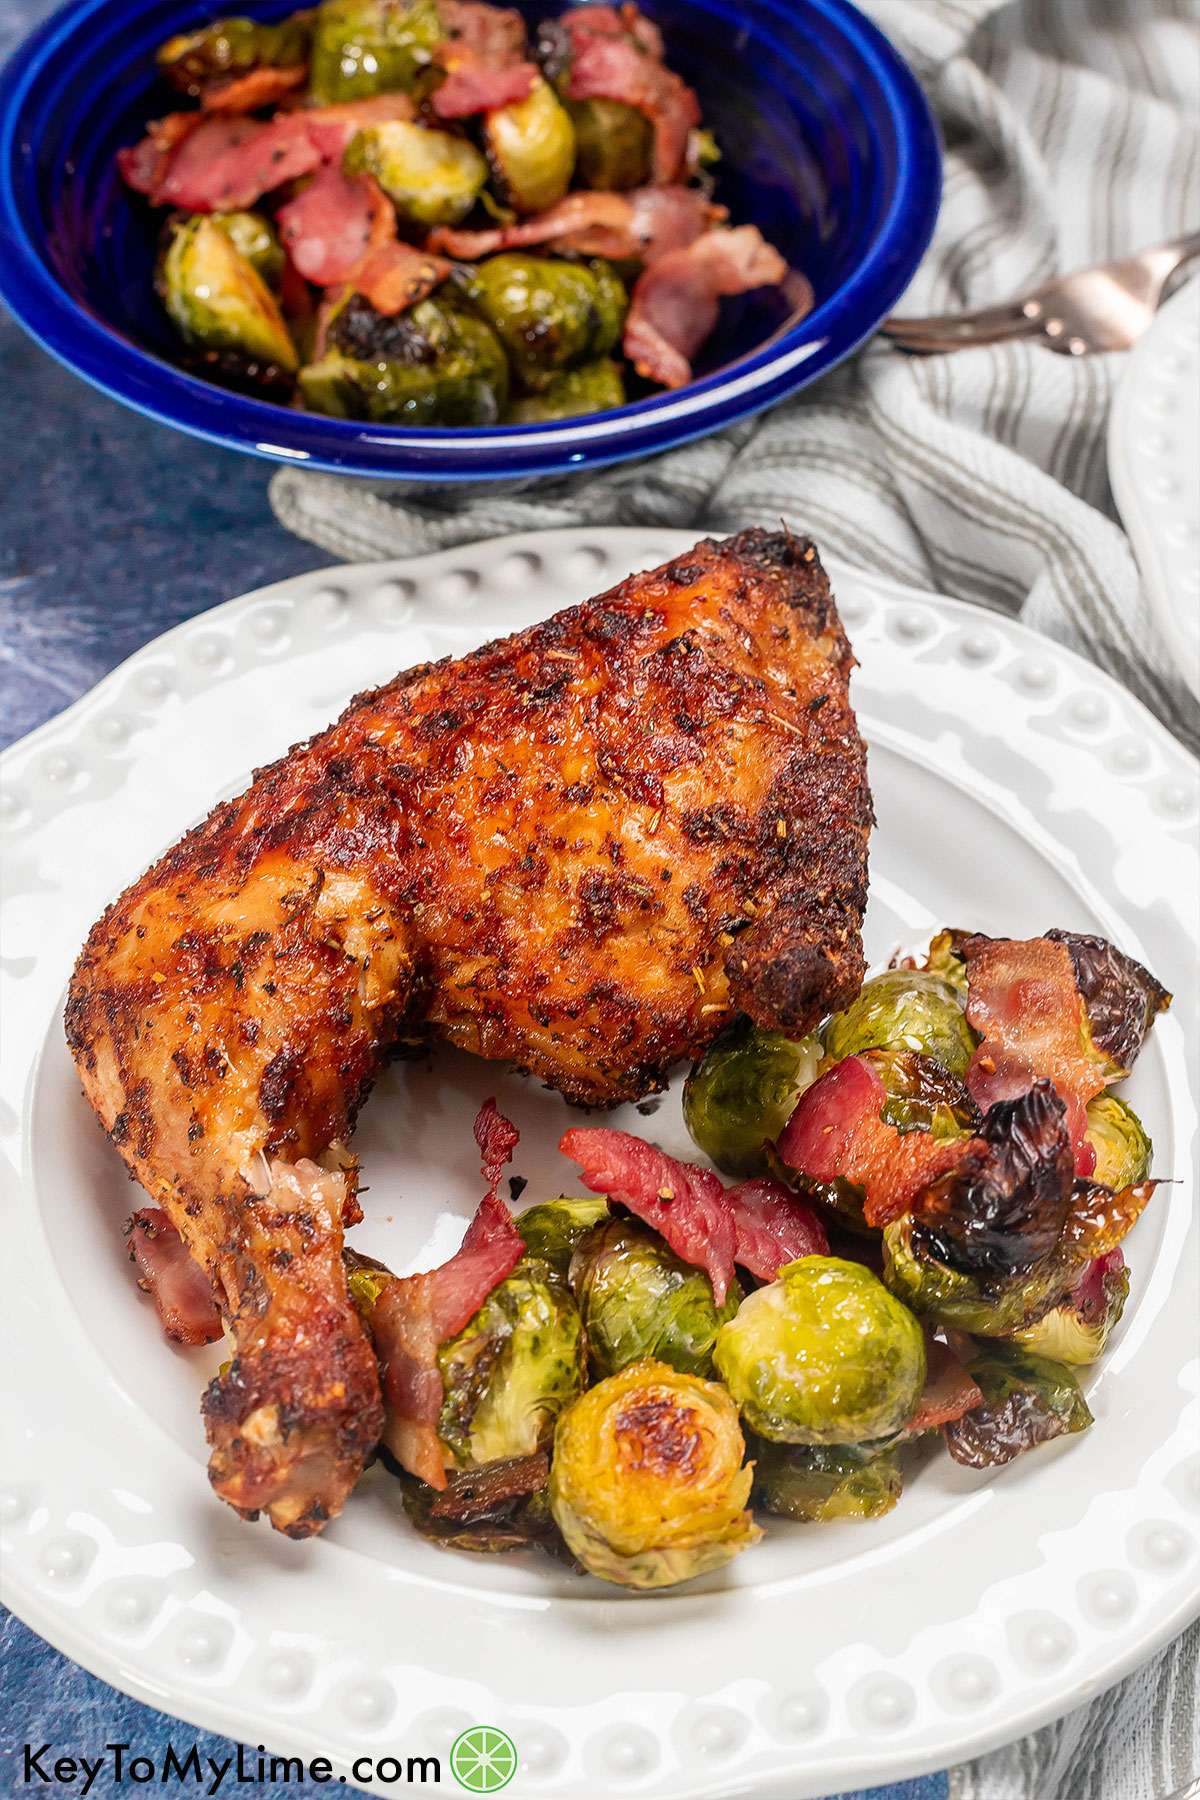 A crispy seasoned chicken quarter with a side of brussel sprouts and crispy bacon pieces throughout.